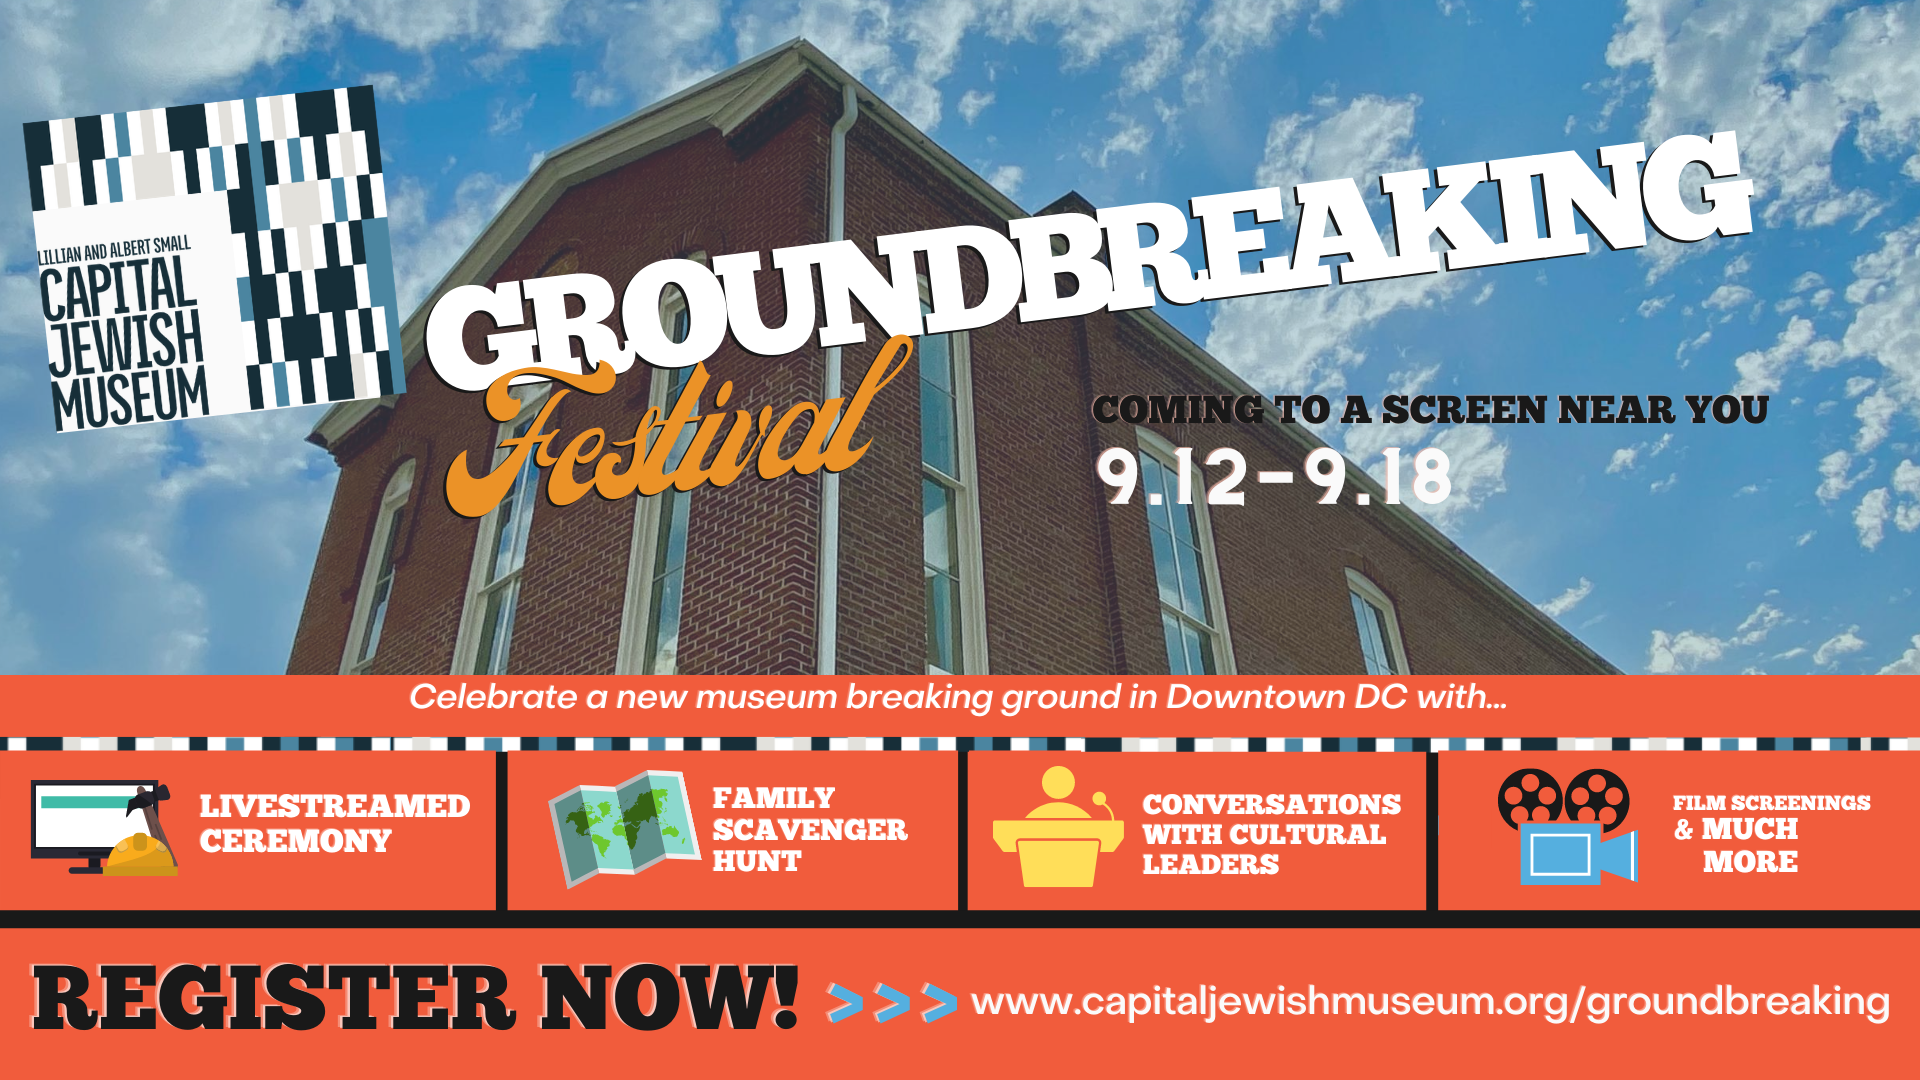 Poster for Groundbreaking Festival at Capital Jewish Museum. Celebrate a new museum breaking ground in Downtown DC with a live-streamed ceremony, family scavenger hunt, conversations with cultural leaders, film screenings and much more. Coming to a screen near you September 12th to September 18th. Register now at www.capitaljewishmuseum.org/groundbreaking